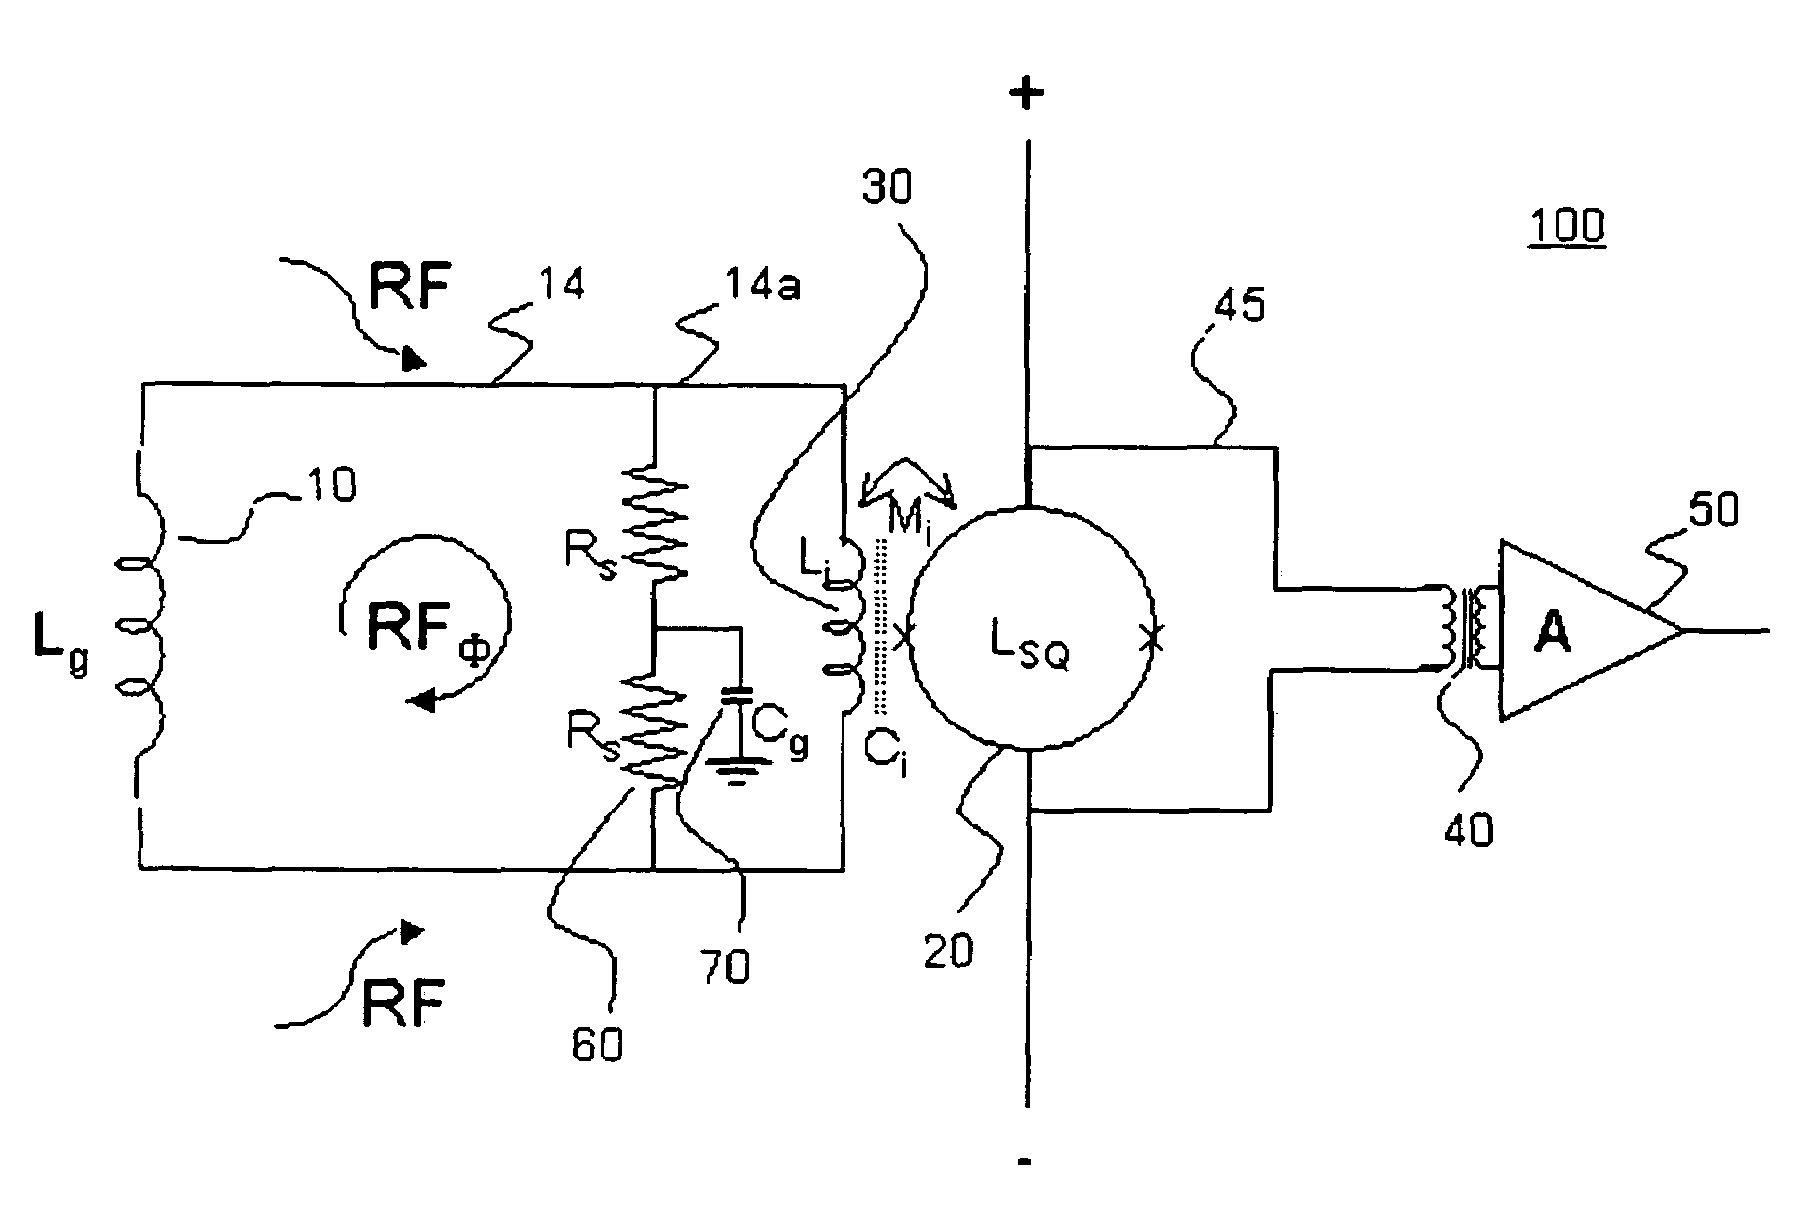 Apparatus for measuring magnetic fields using a superconducting quantum interference device